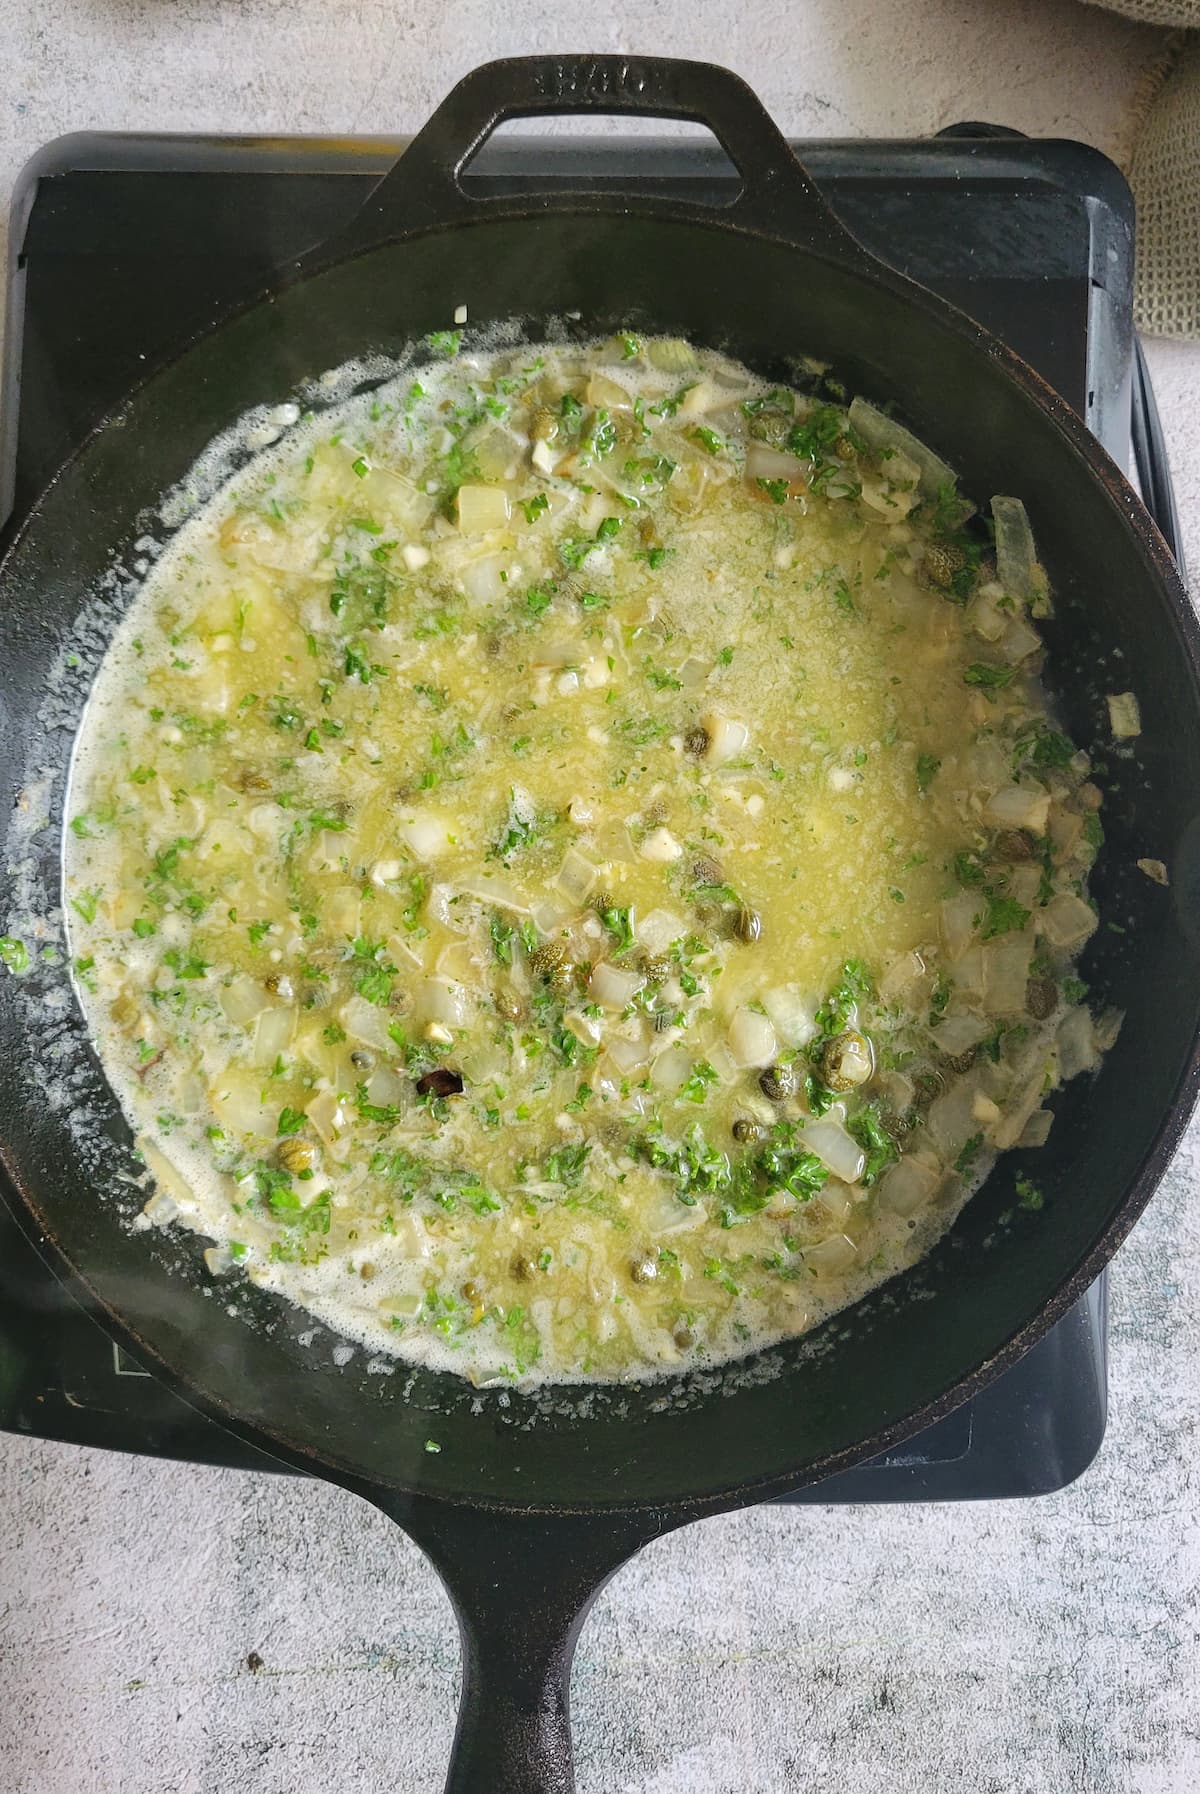 butter, parsley, capers and onions in melted butter